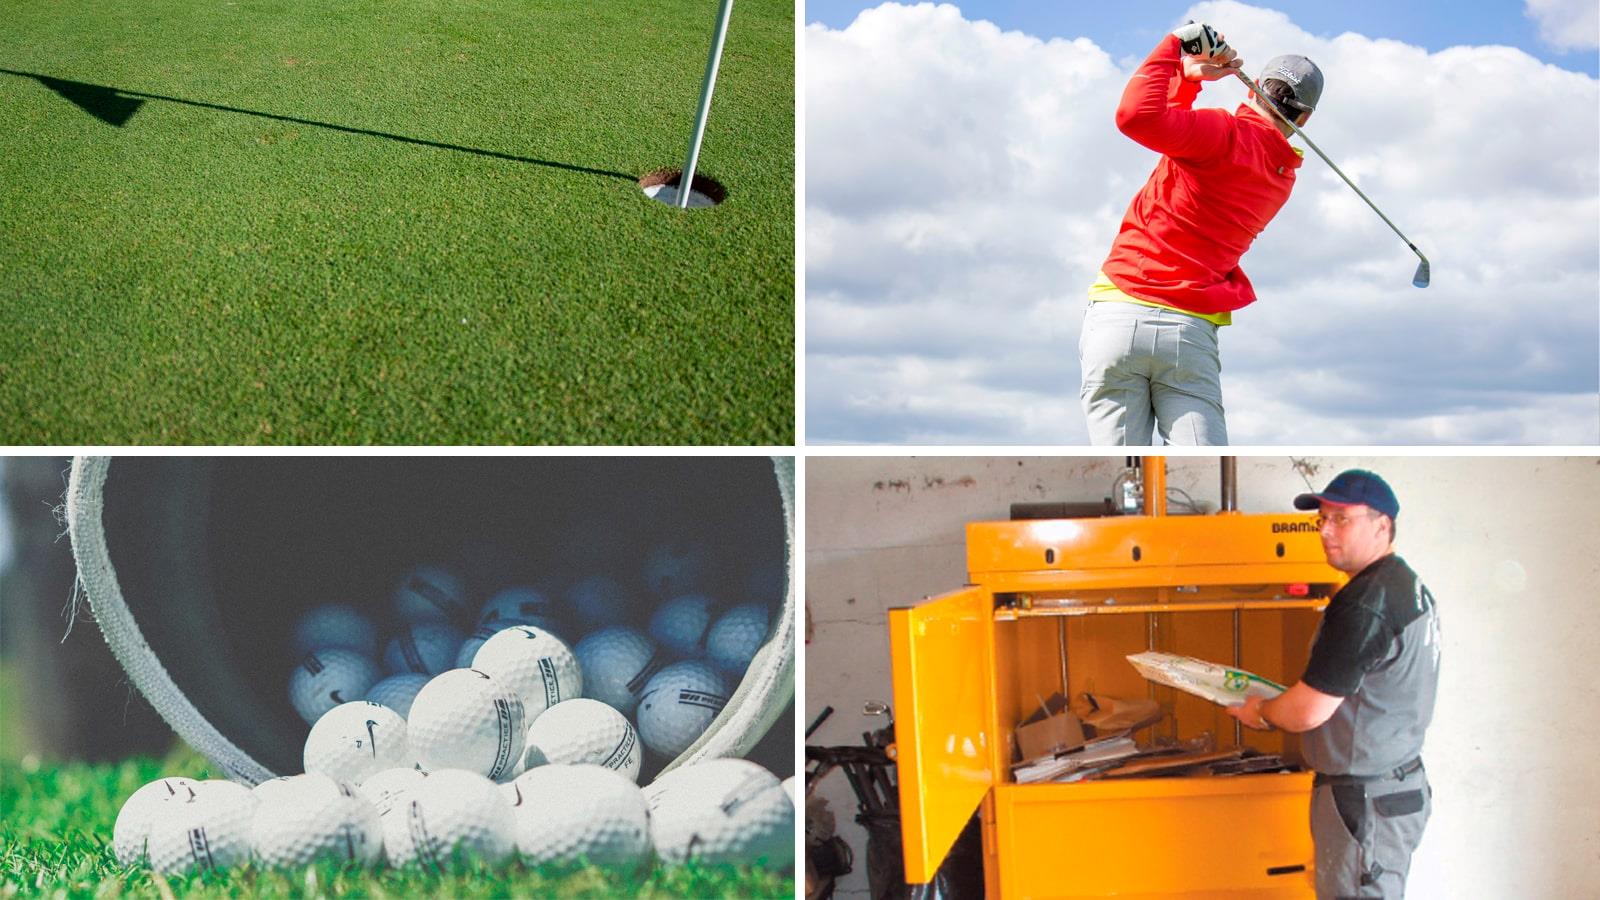 Collage of man playing golf and employee at yellow baler